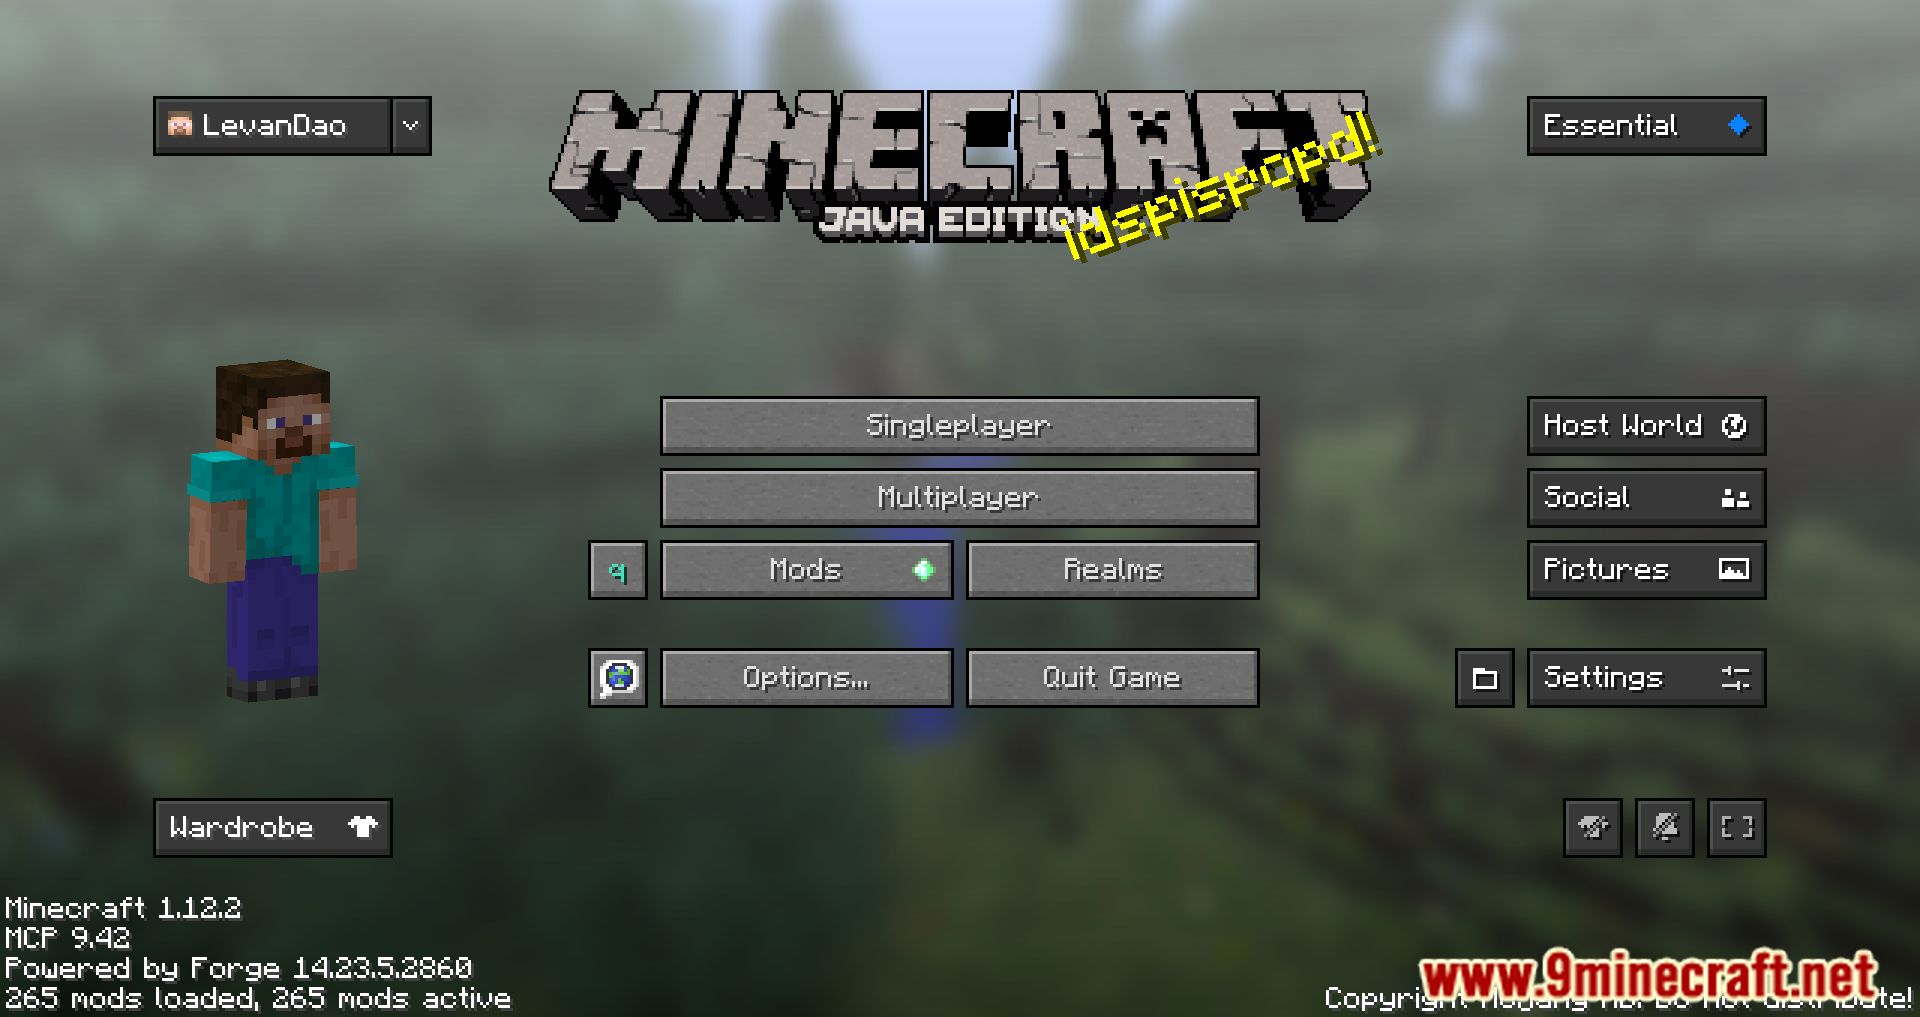 Overloaded mod for Minecraft 1.12.2 - very complex and advanced